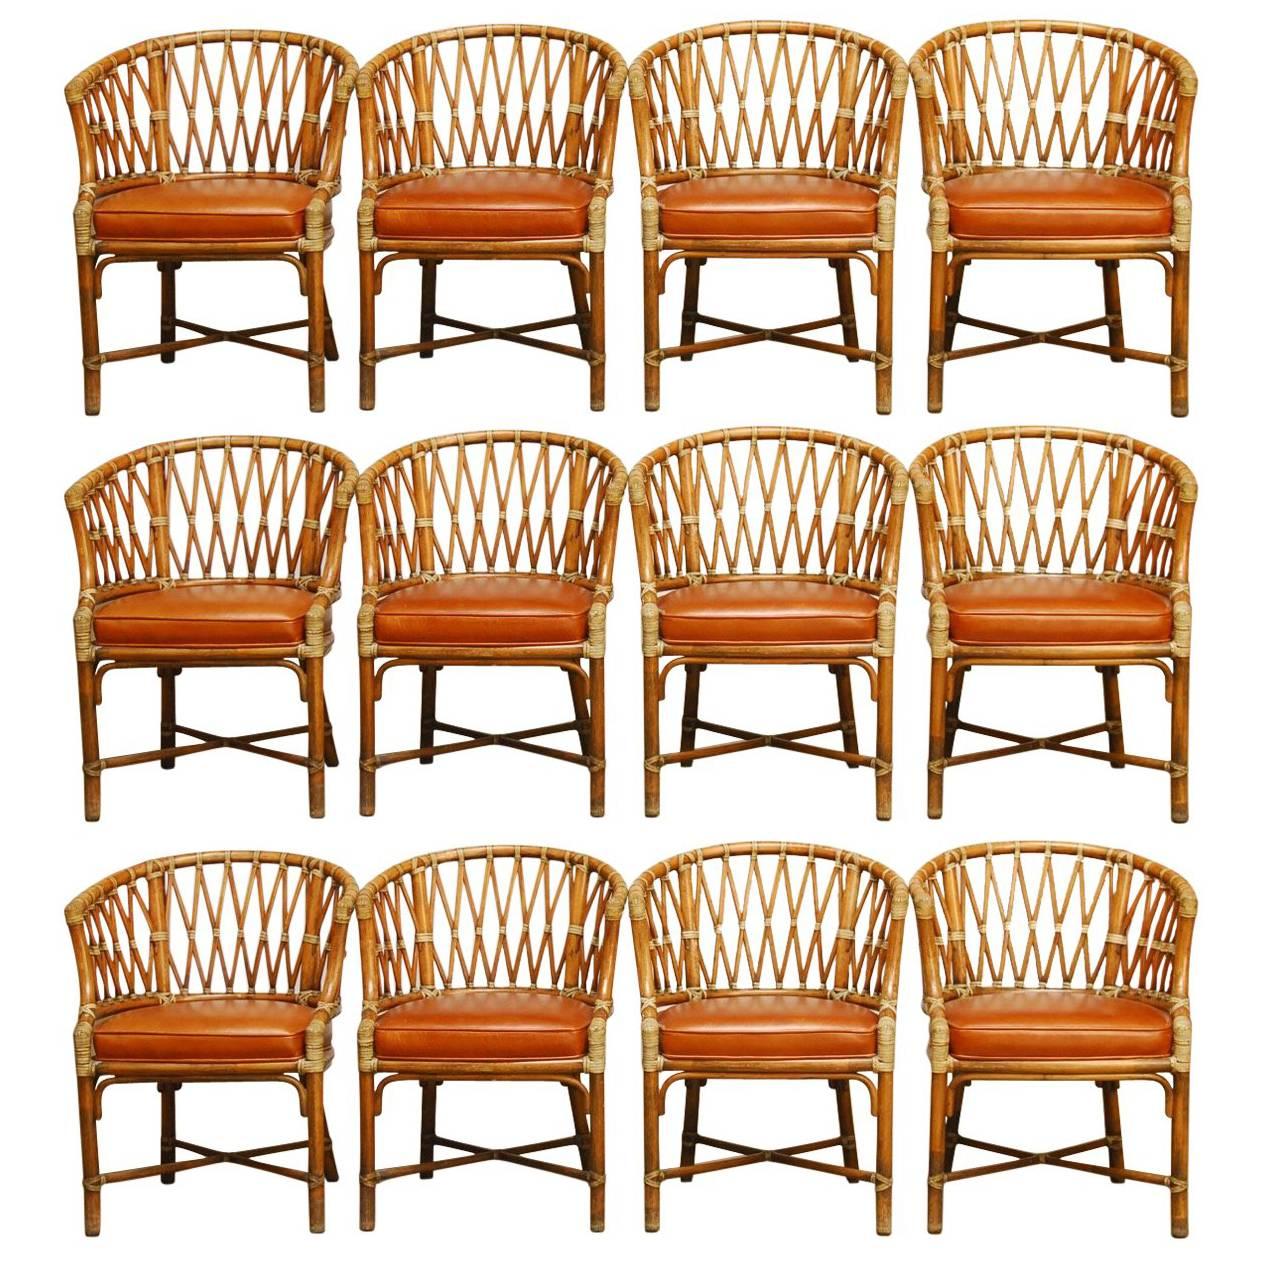 Set of 50 McGuire Bamboo Fretwork Barrel Chairs